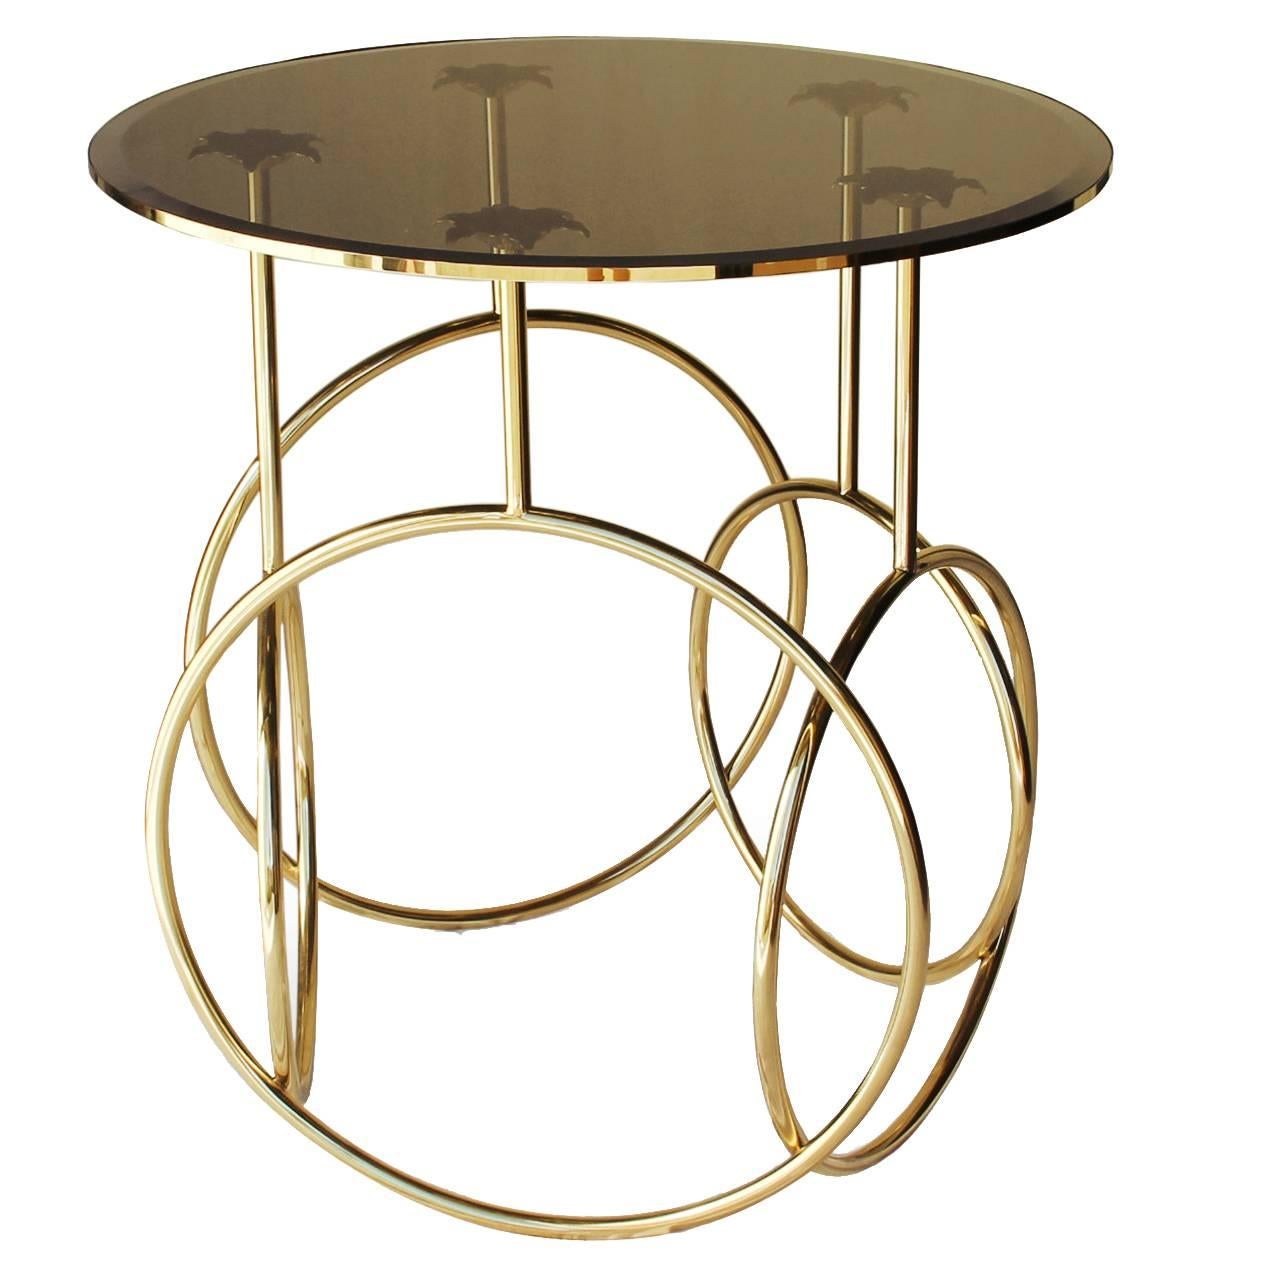 European modern Polished Brass and Glass rings Round Side Table by Koket For Sale